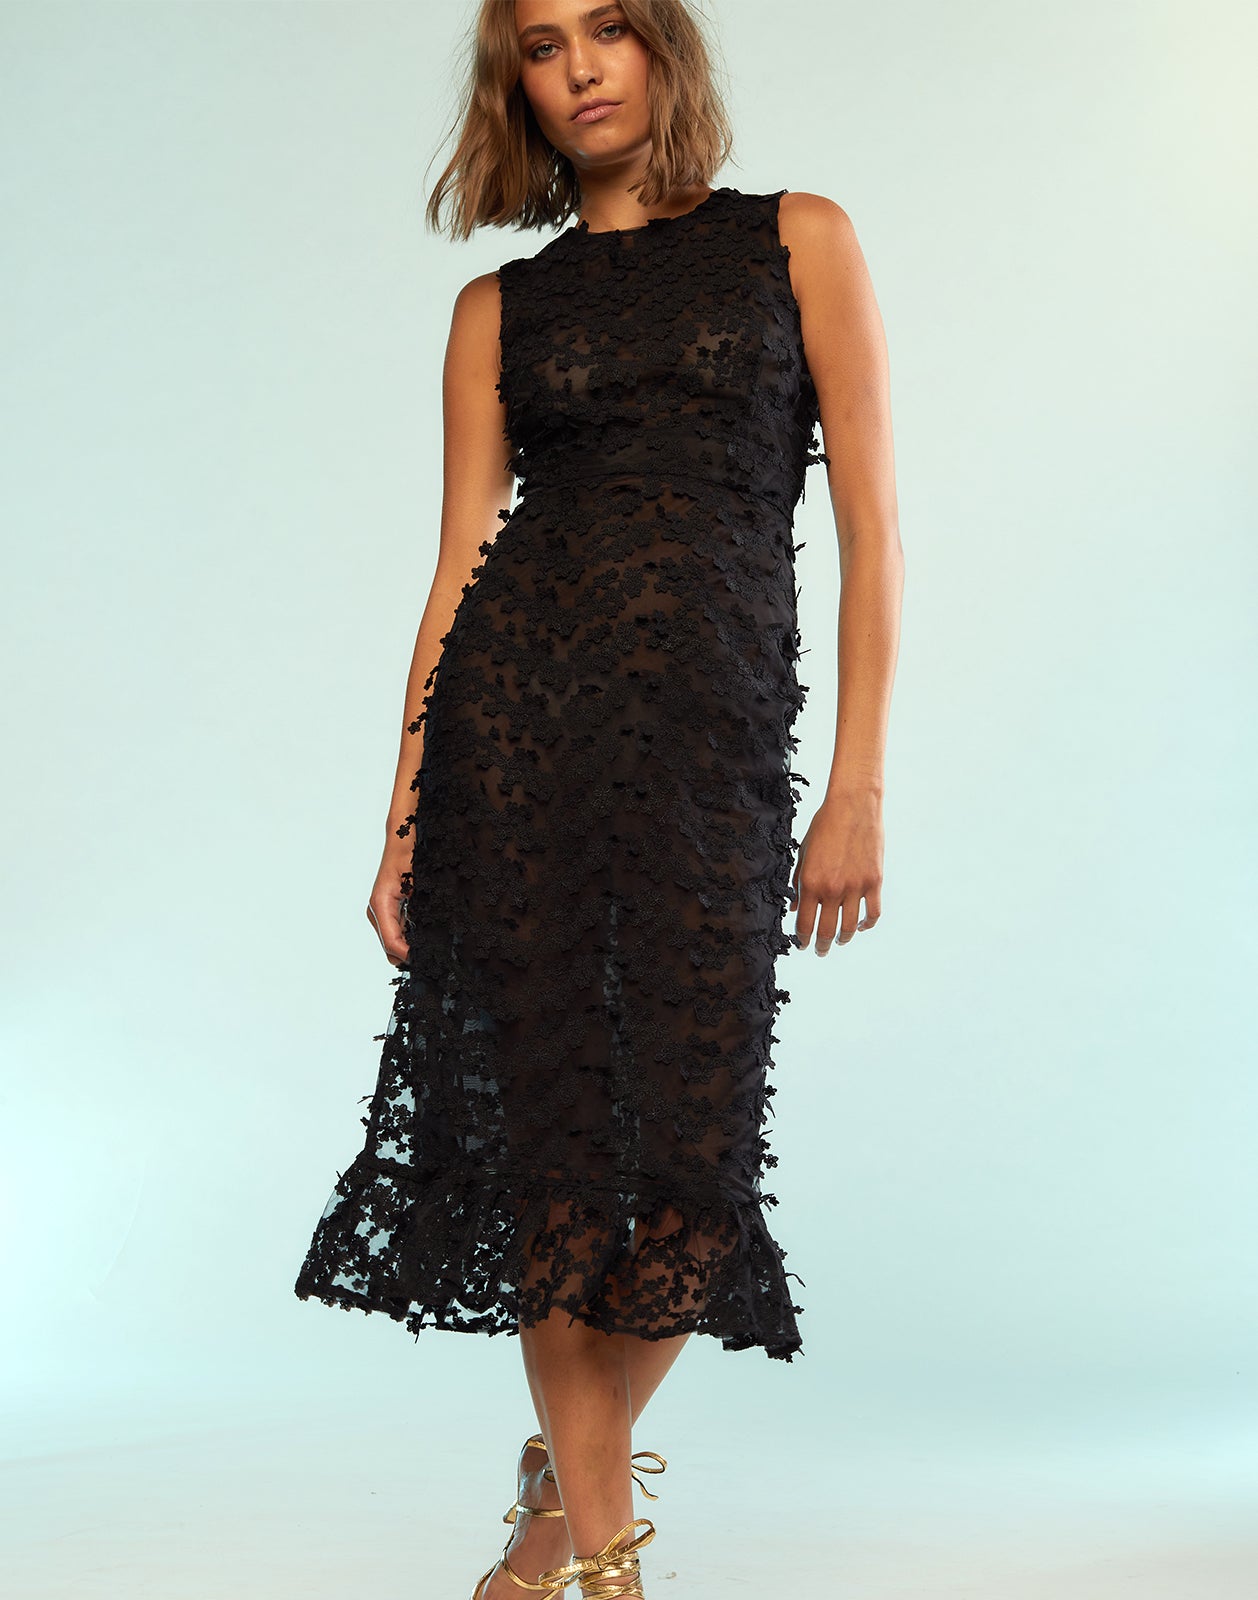 3D Embroidered Tulle Dress